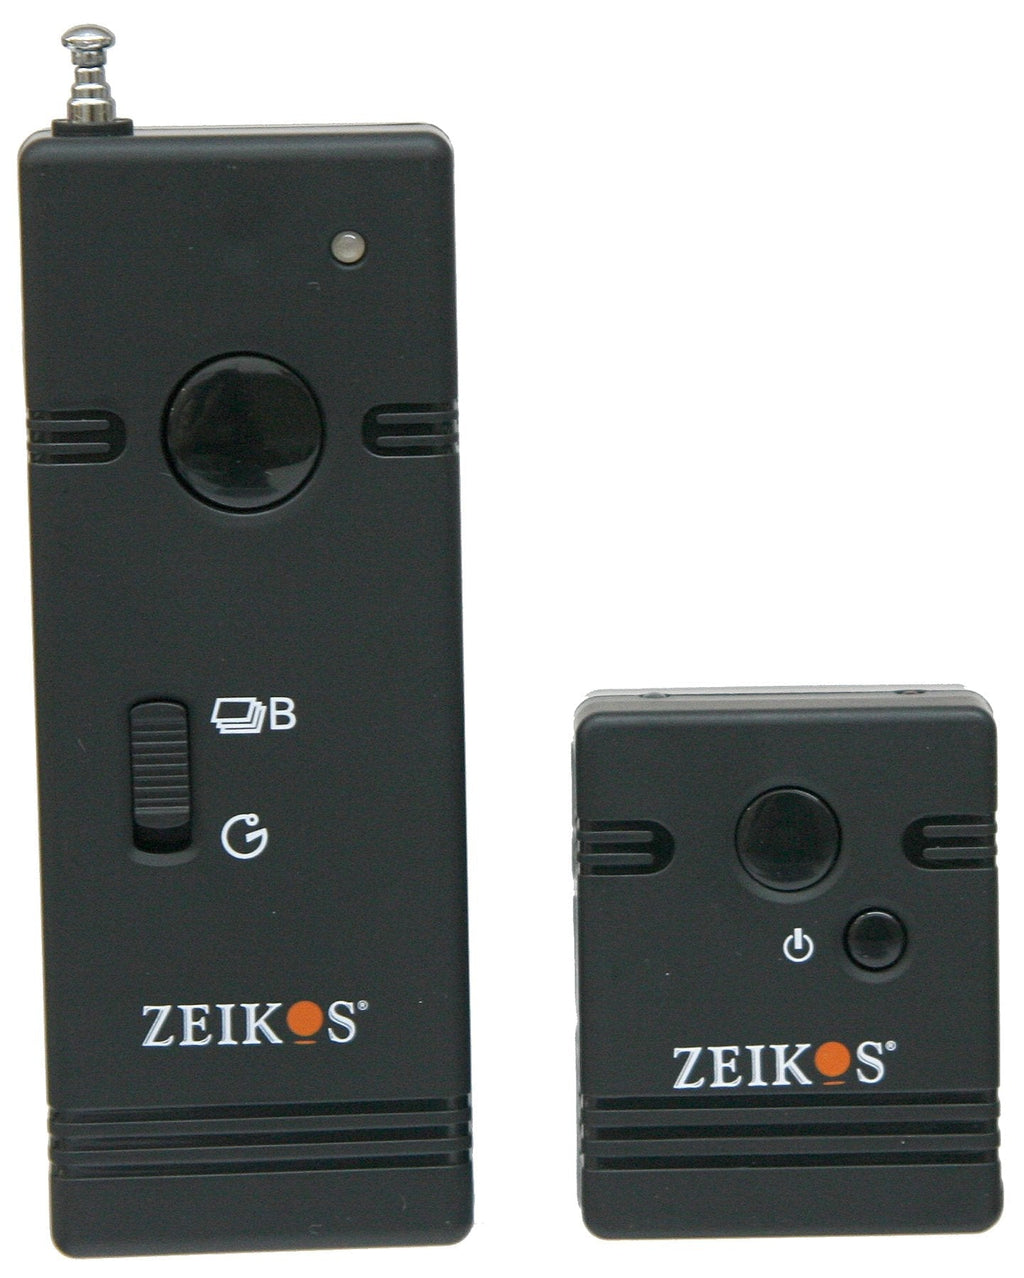 Zeikos ZE-WSRS Professional Wireless Remote Shutter Release for Sony Alpha Camera A7R III, A9 A7R II, A7 II, A7 A7R A7S A6500 A6300 A6000 A55 A65 A77 A99 A900 A700 A580 A560 A550 A500 A450 A390 A380